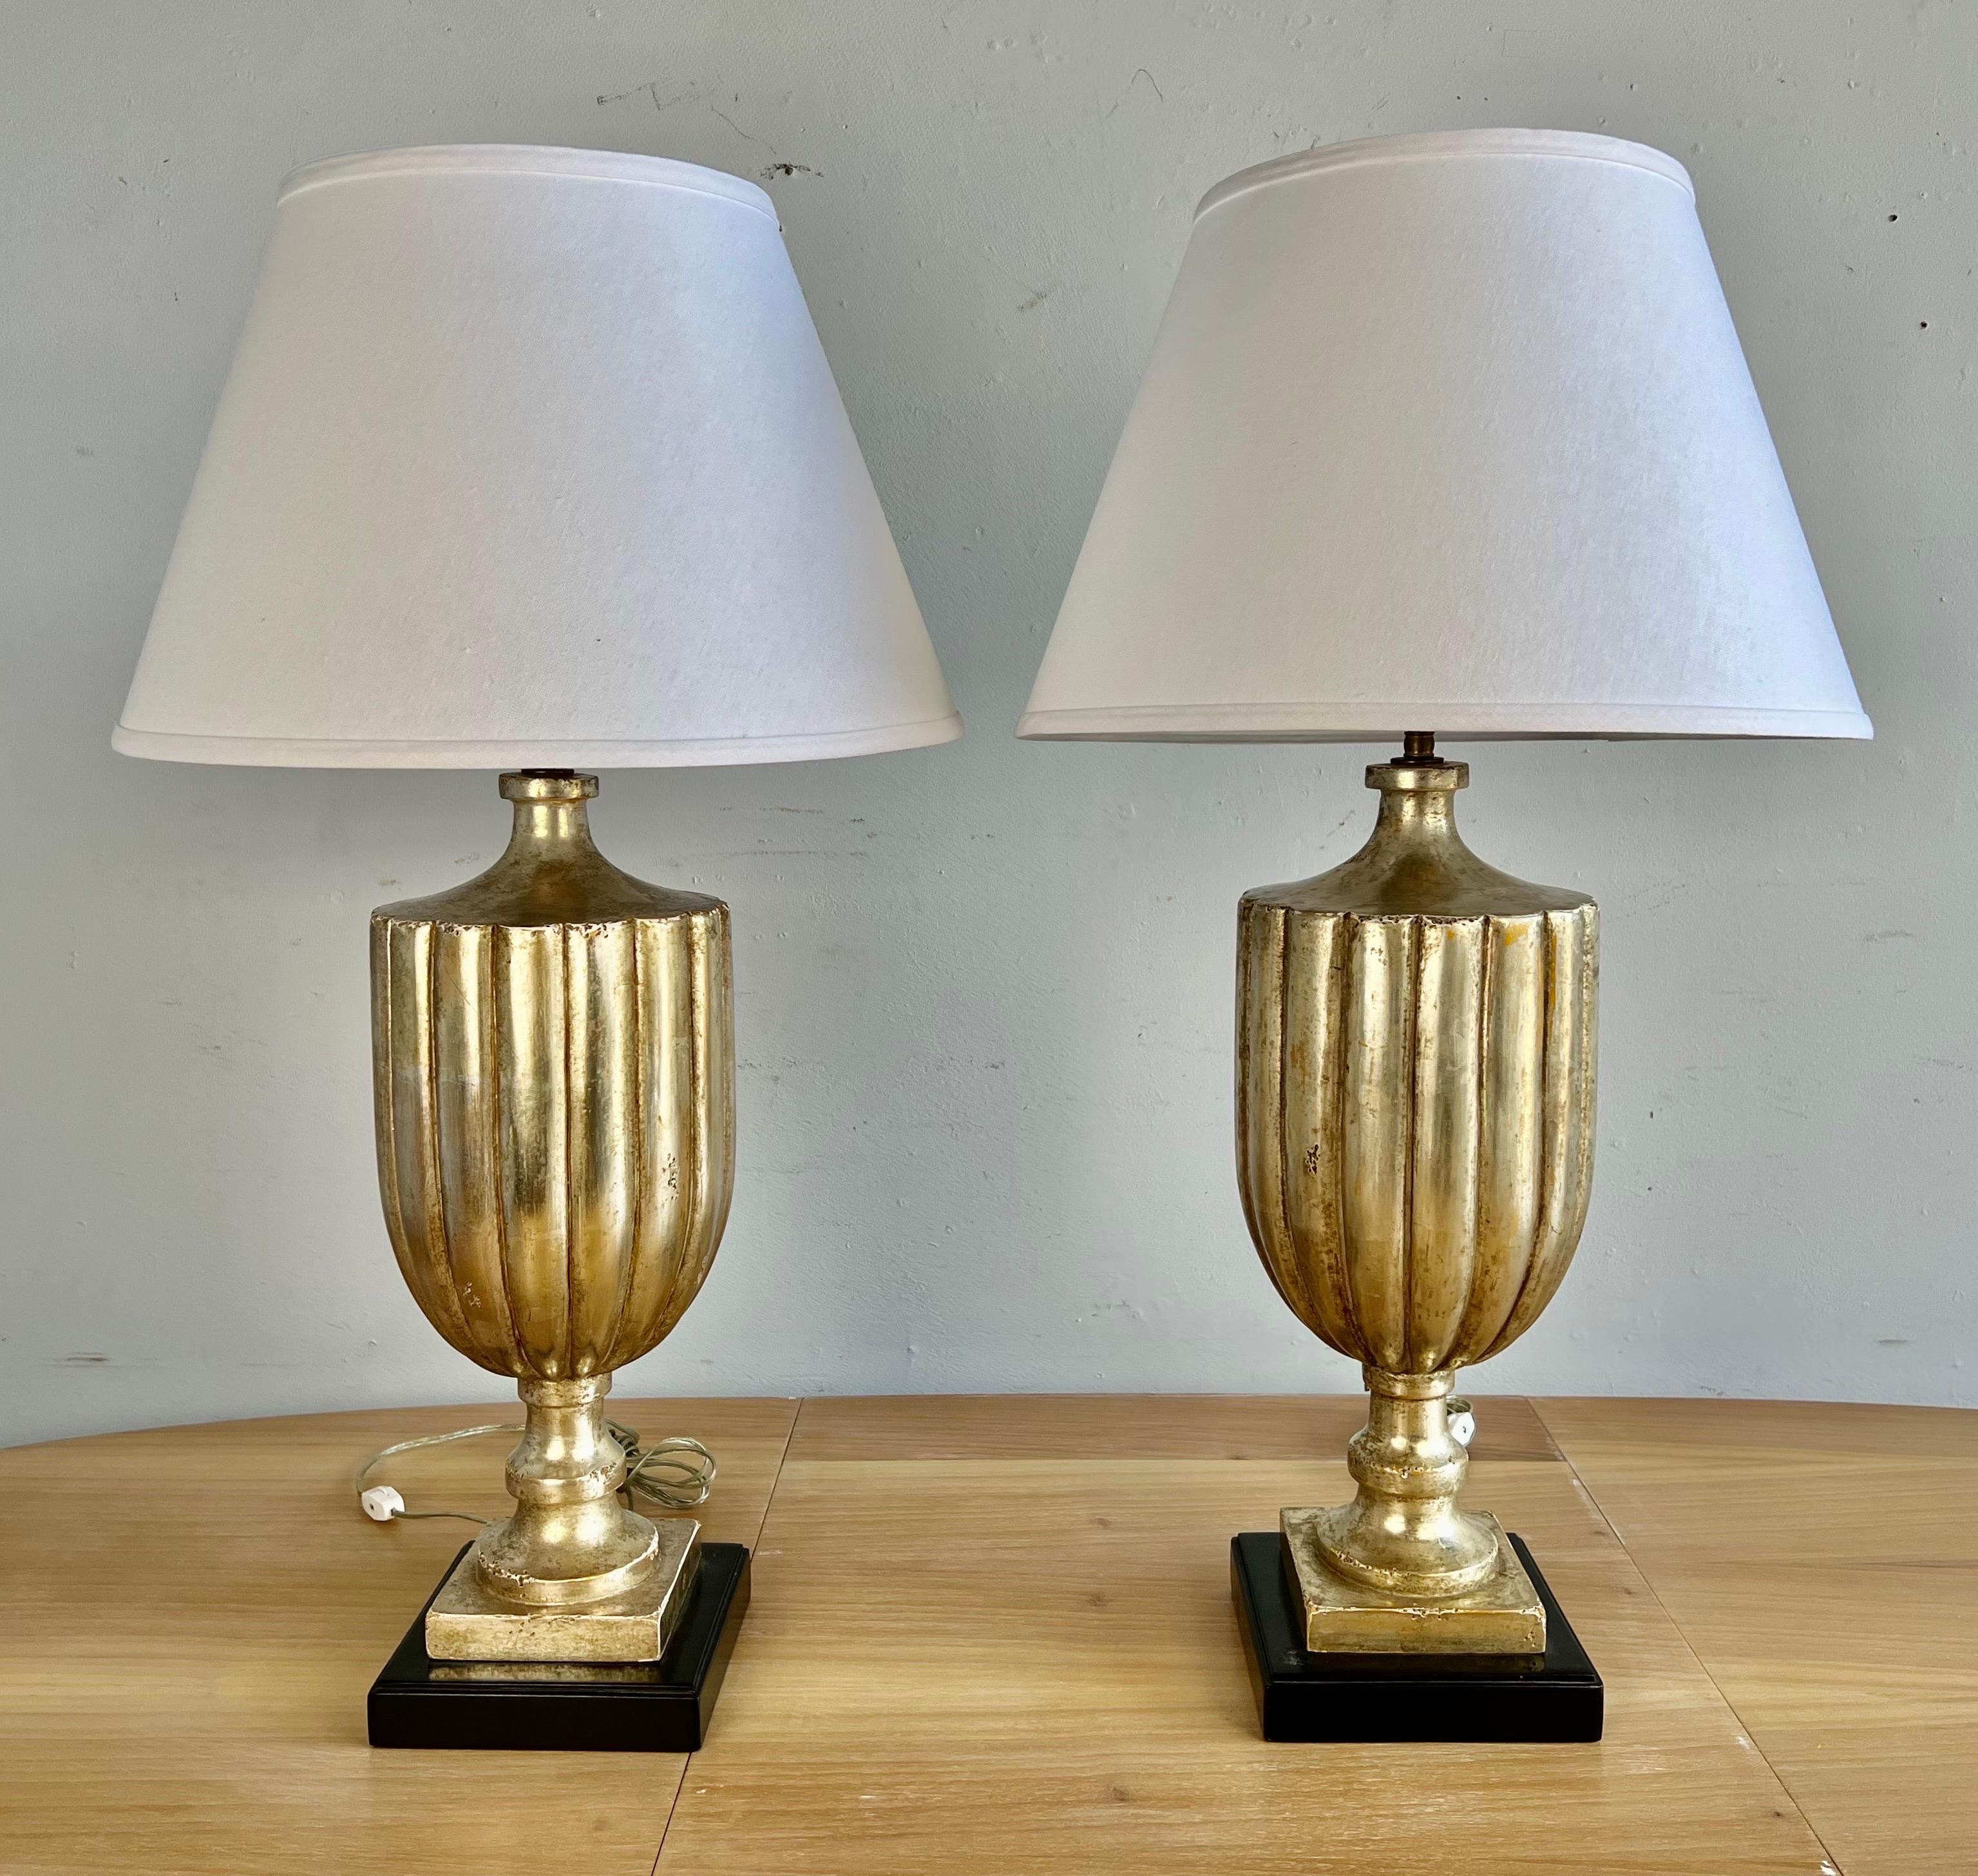 Pair of carved wood fluted urn shaped lamps in a silvery gold finish. The lamps are crowned with white linen shades. Newly rewired and in working condition.